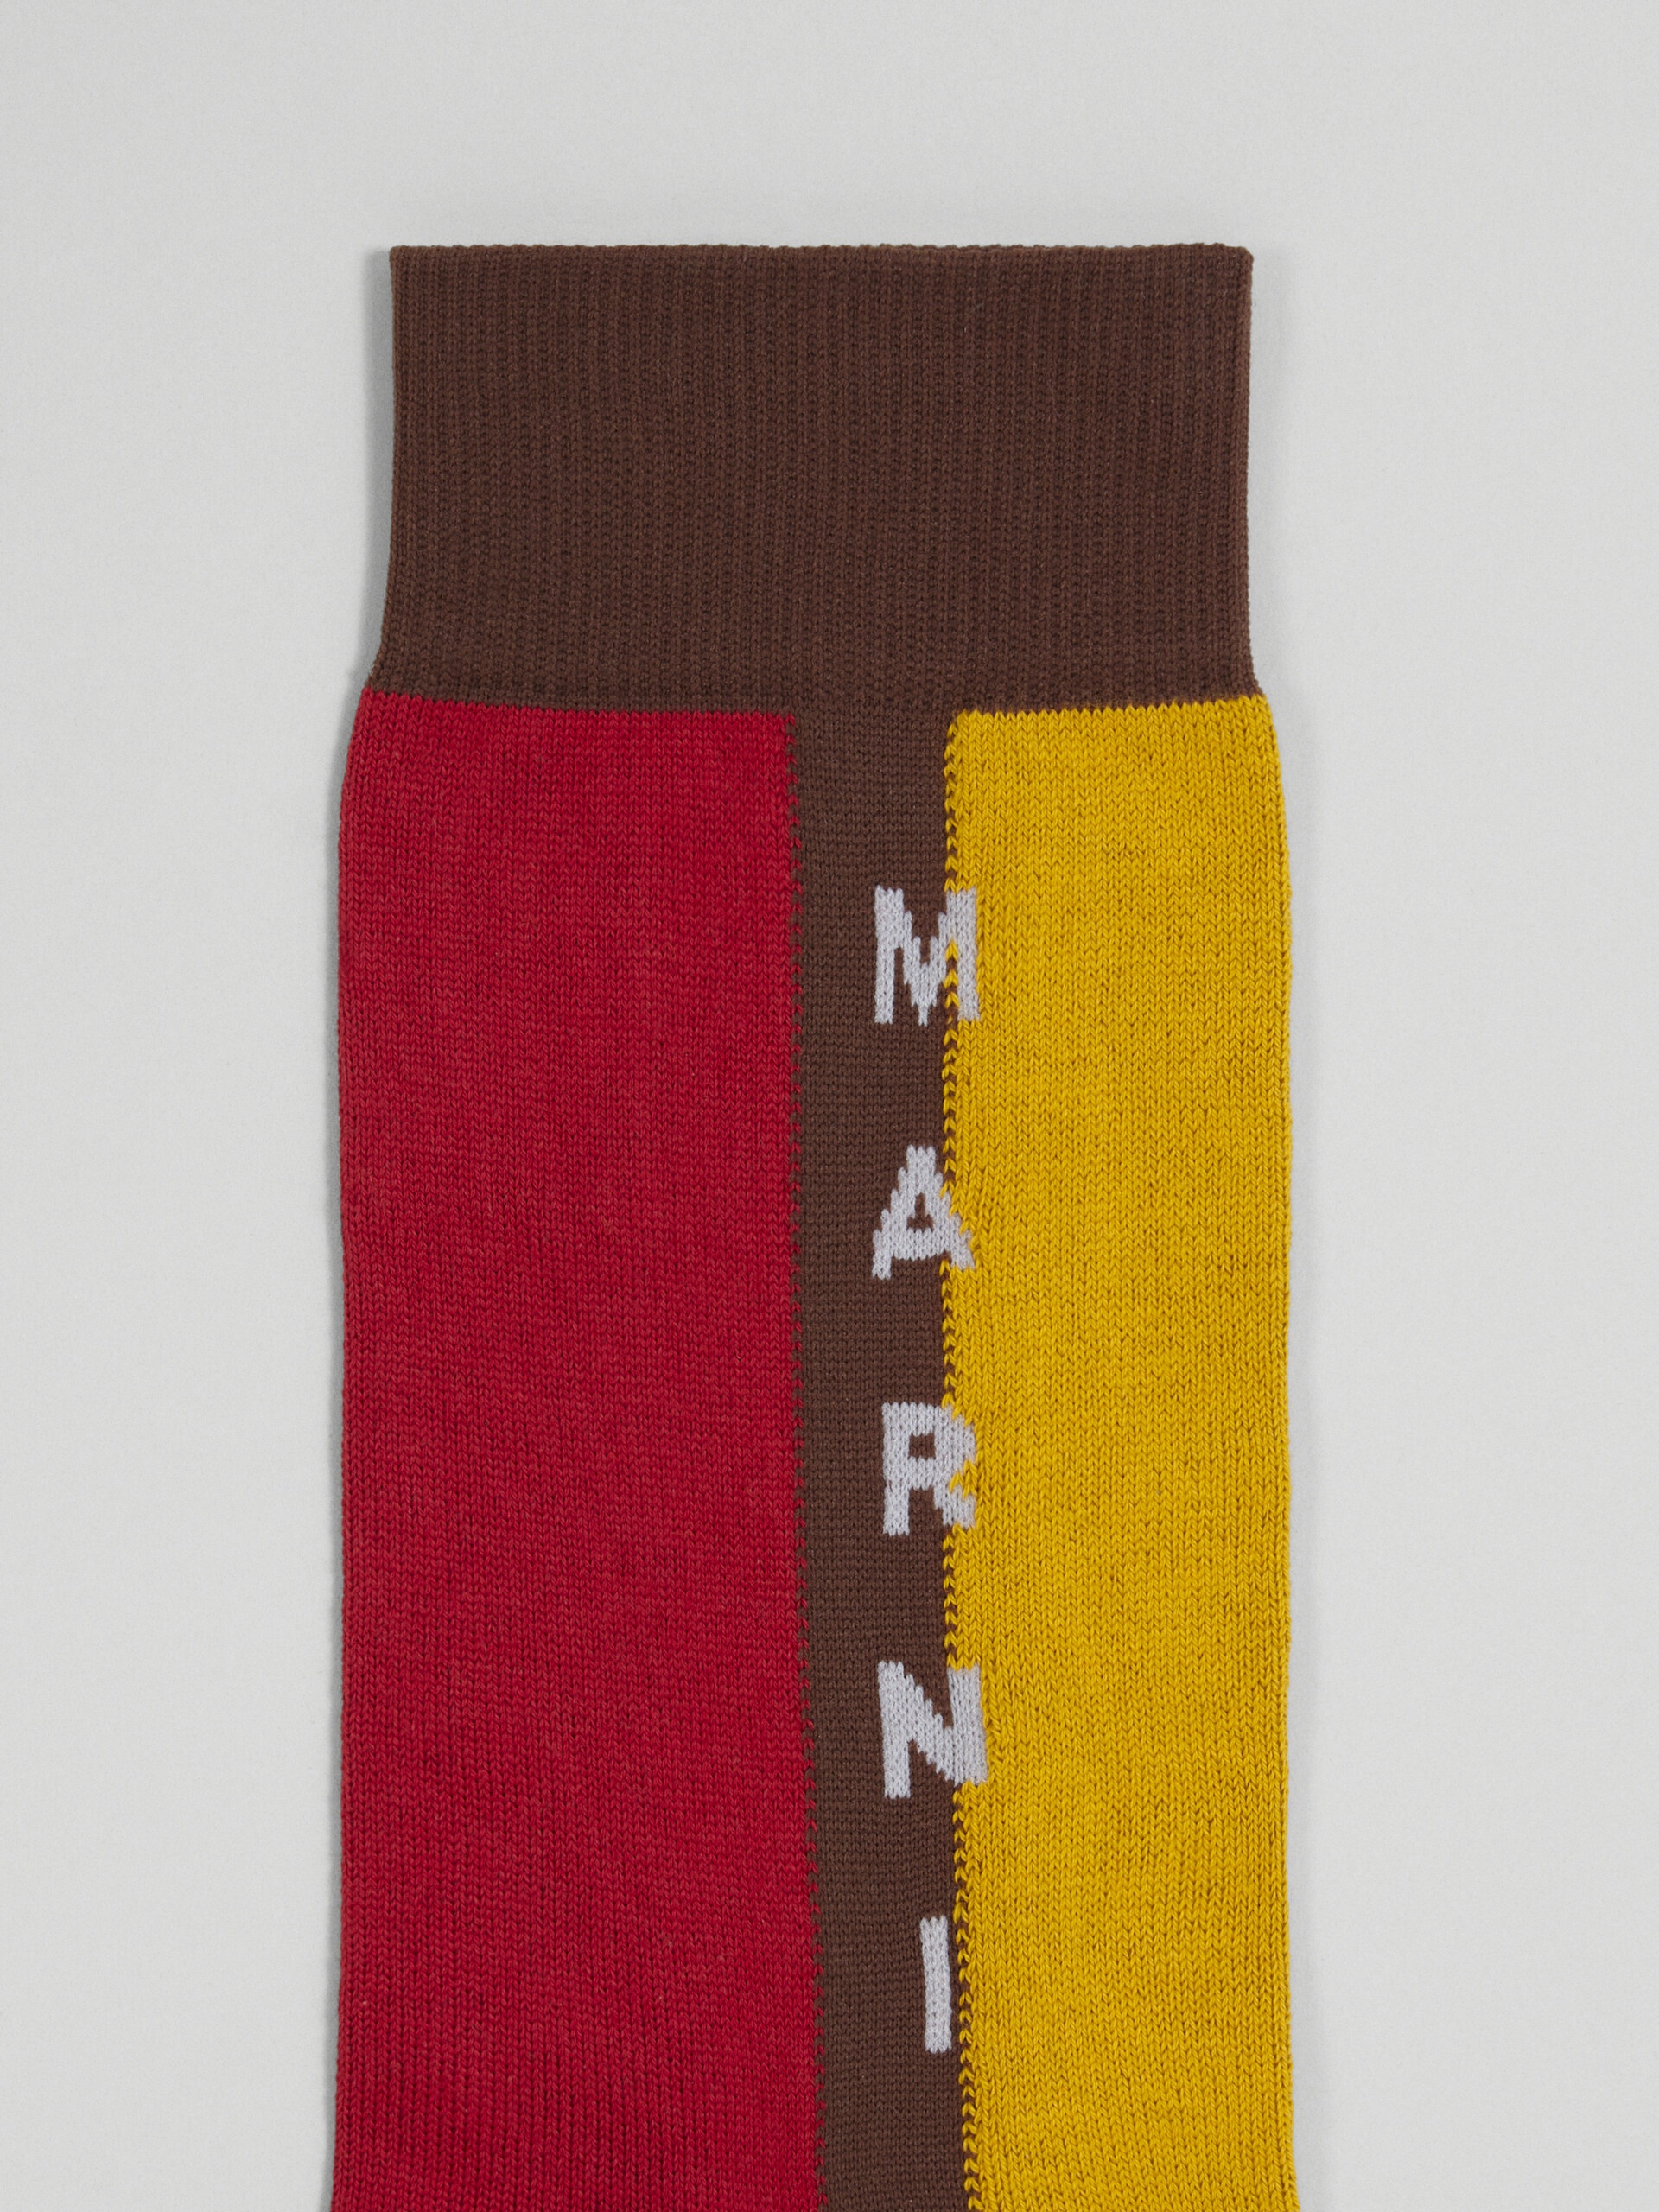 RED AND YELLOW LISLE COTTON AND NYLON SOCK - 3